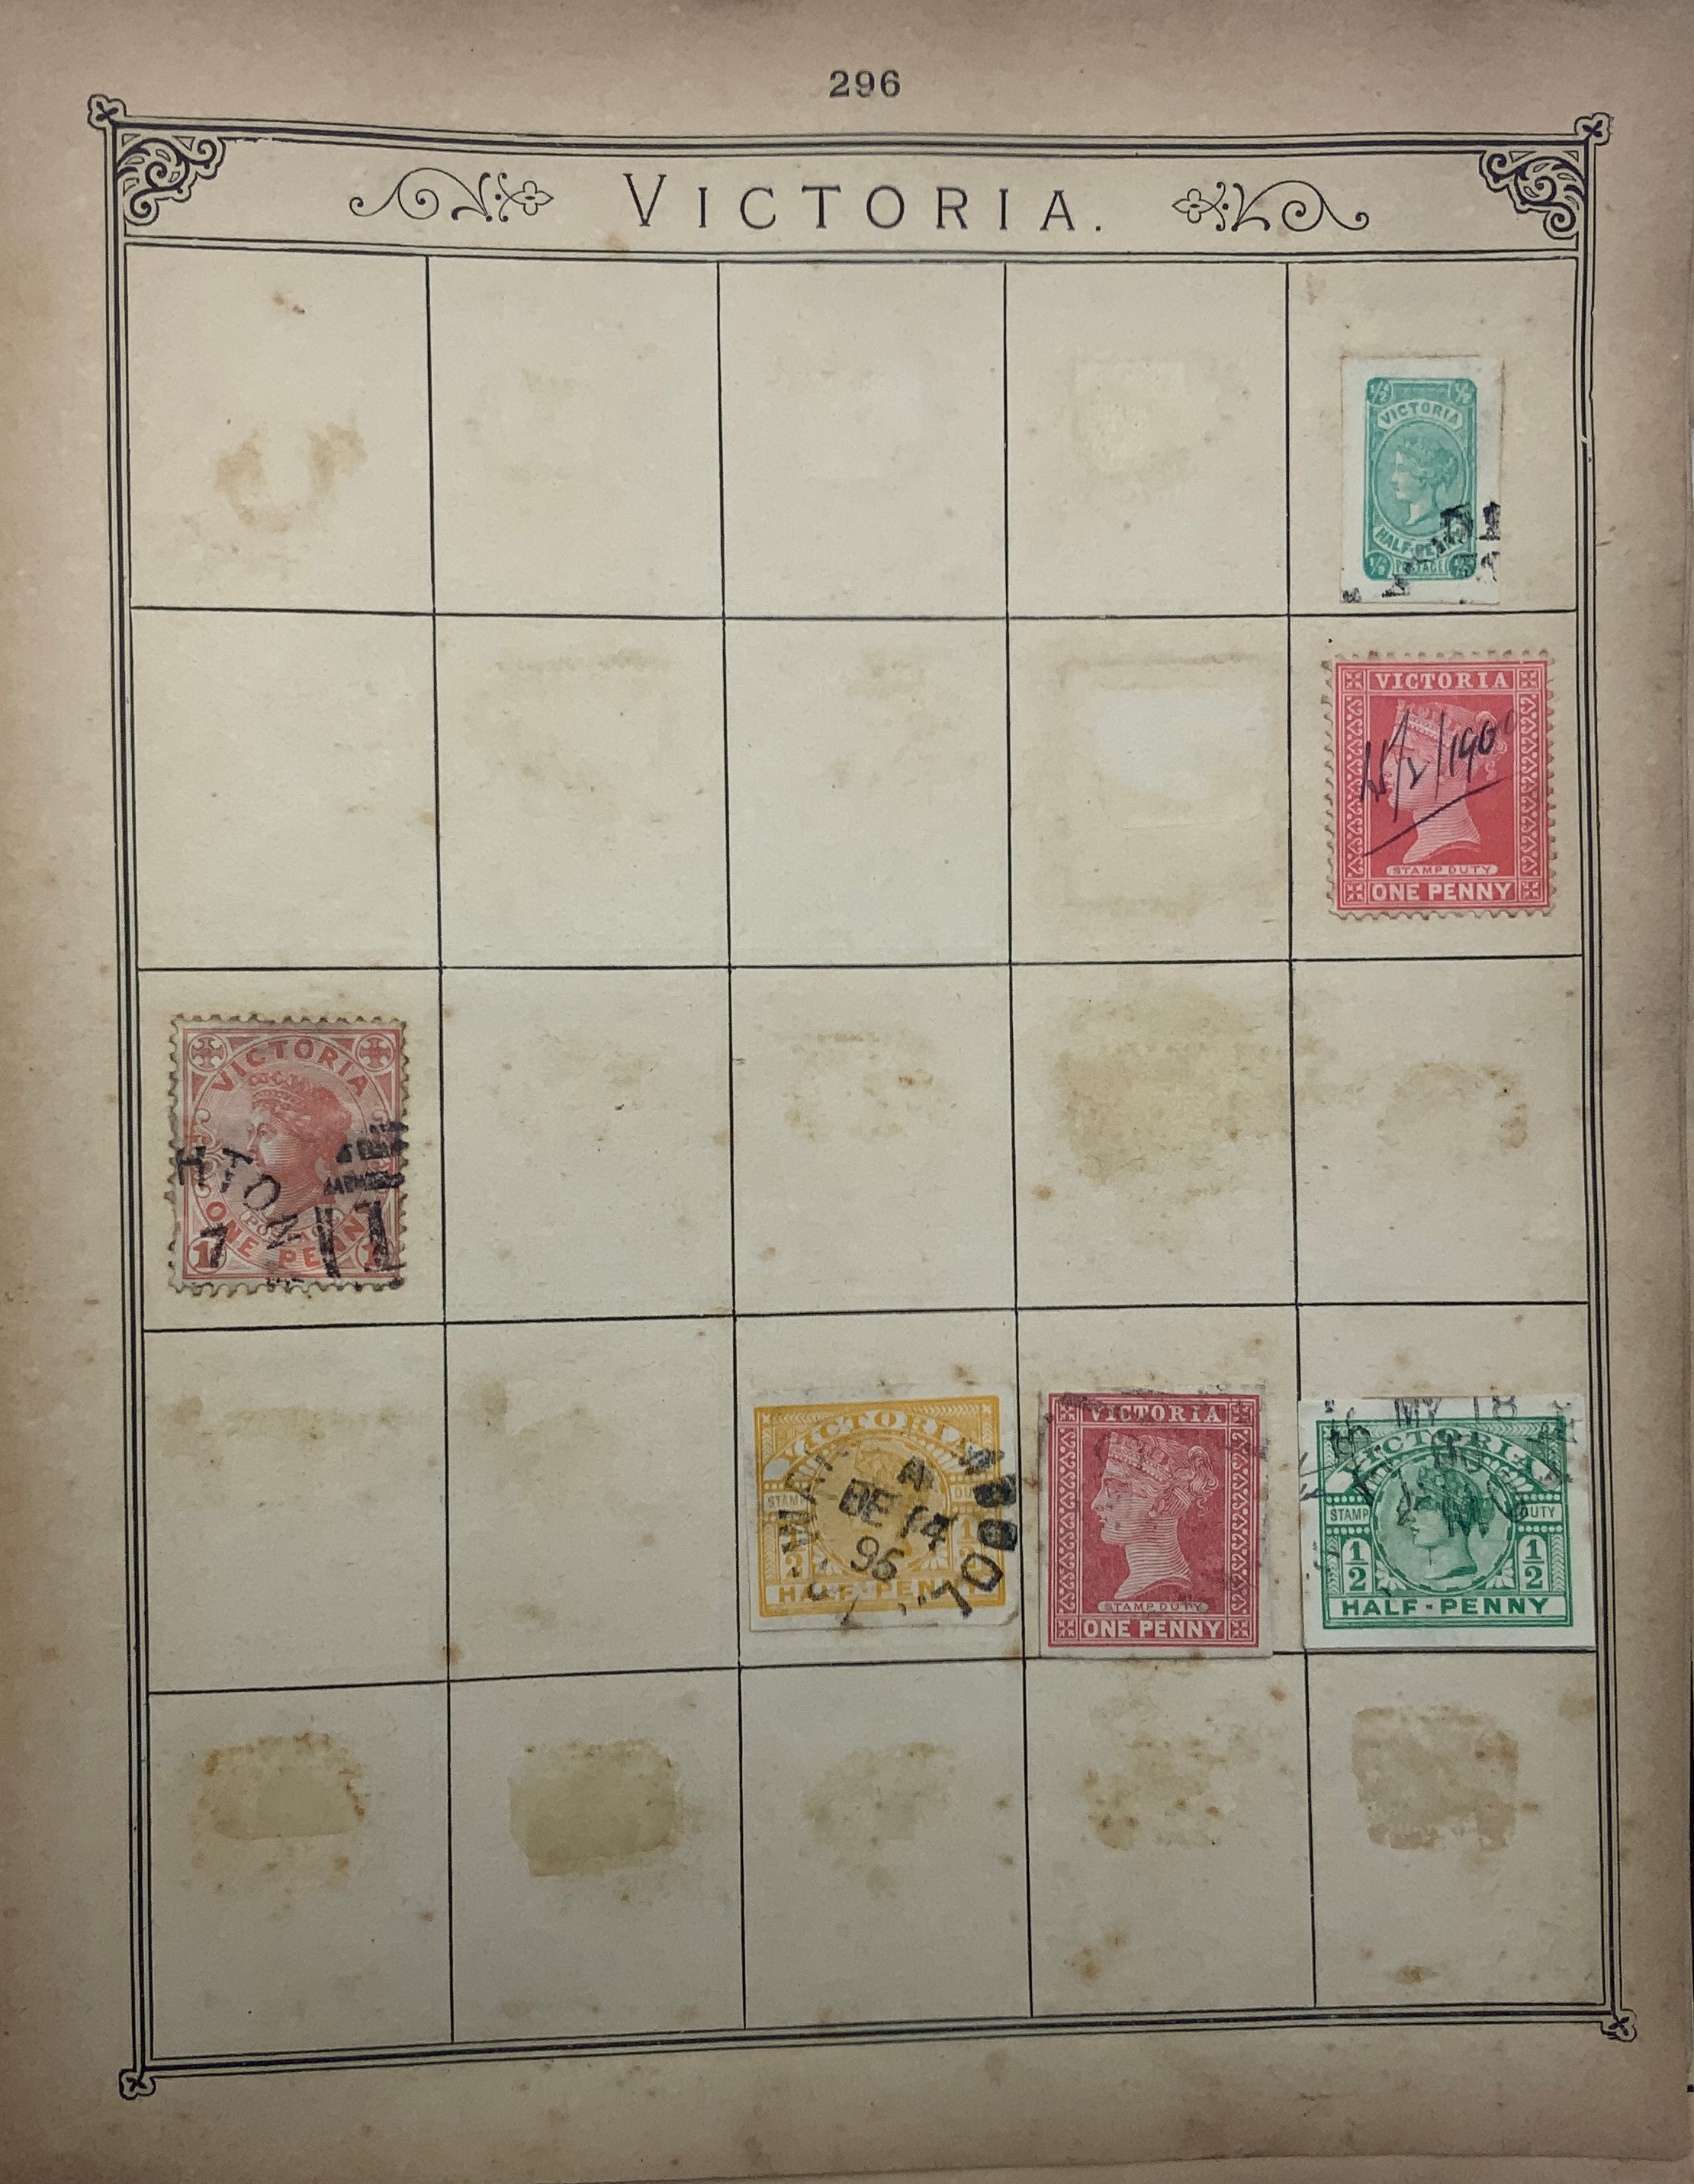 SELECTION OF VARIOUS STAMPS IN ALBUM, SOME LOOSE PAGES - Image 87 of 92